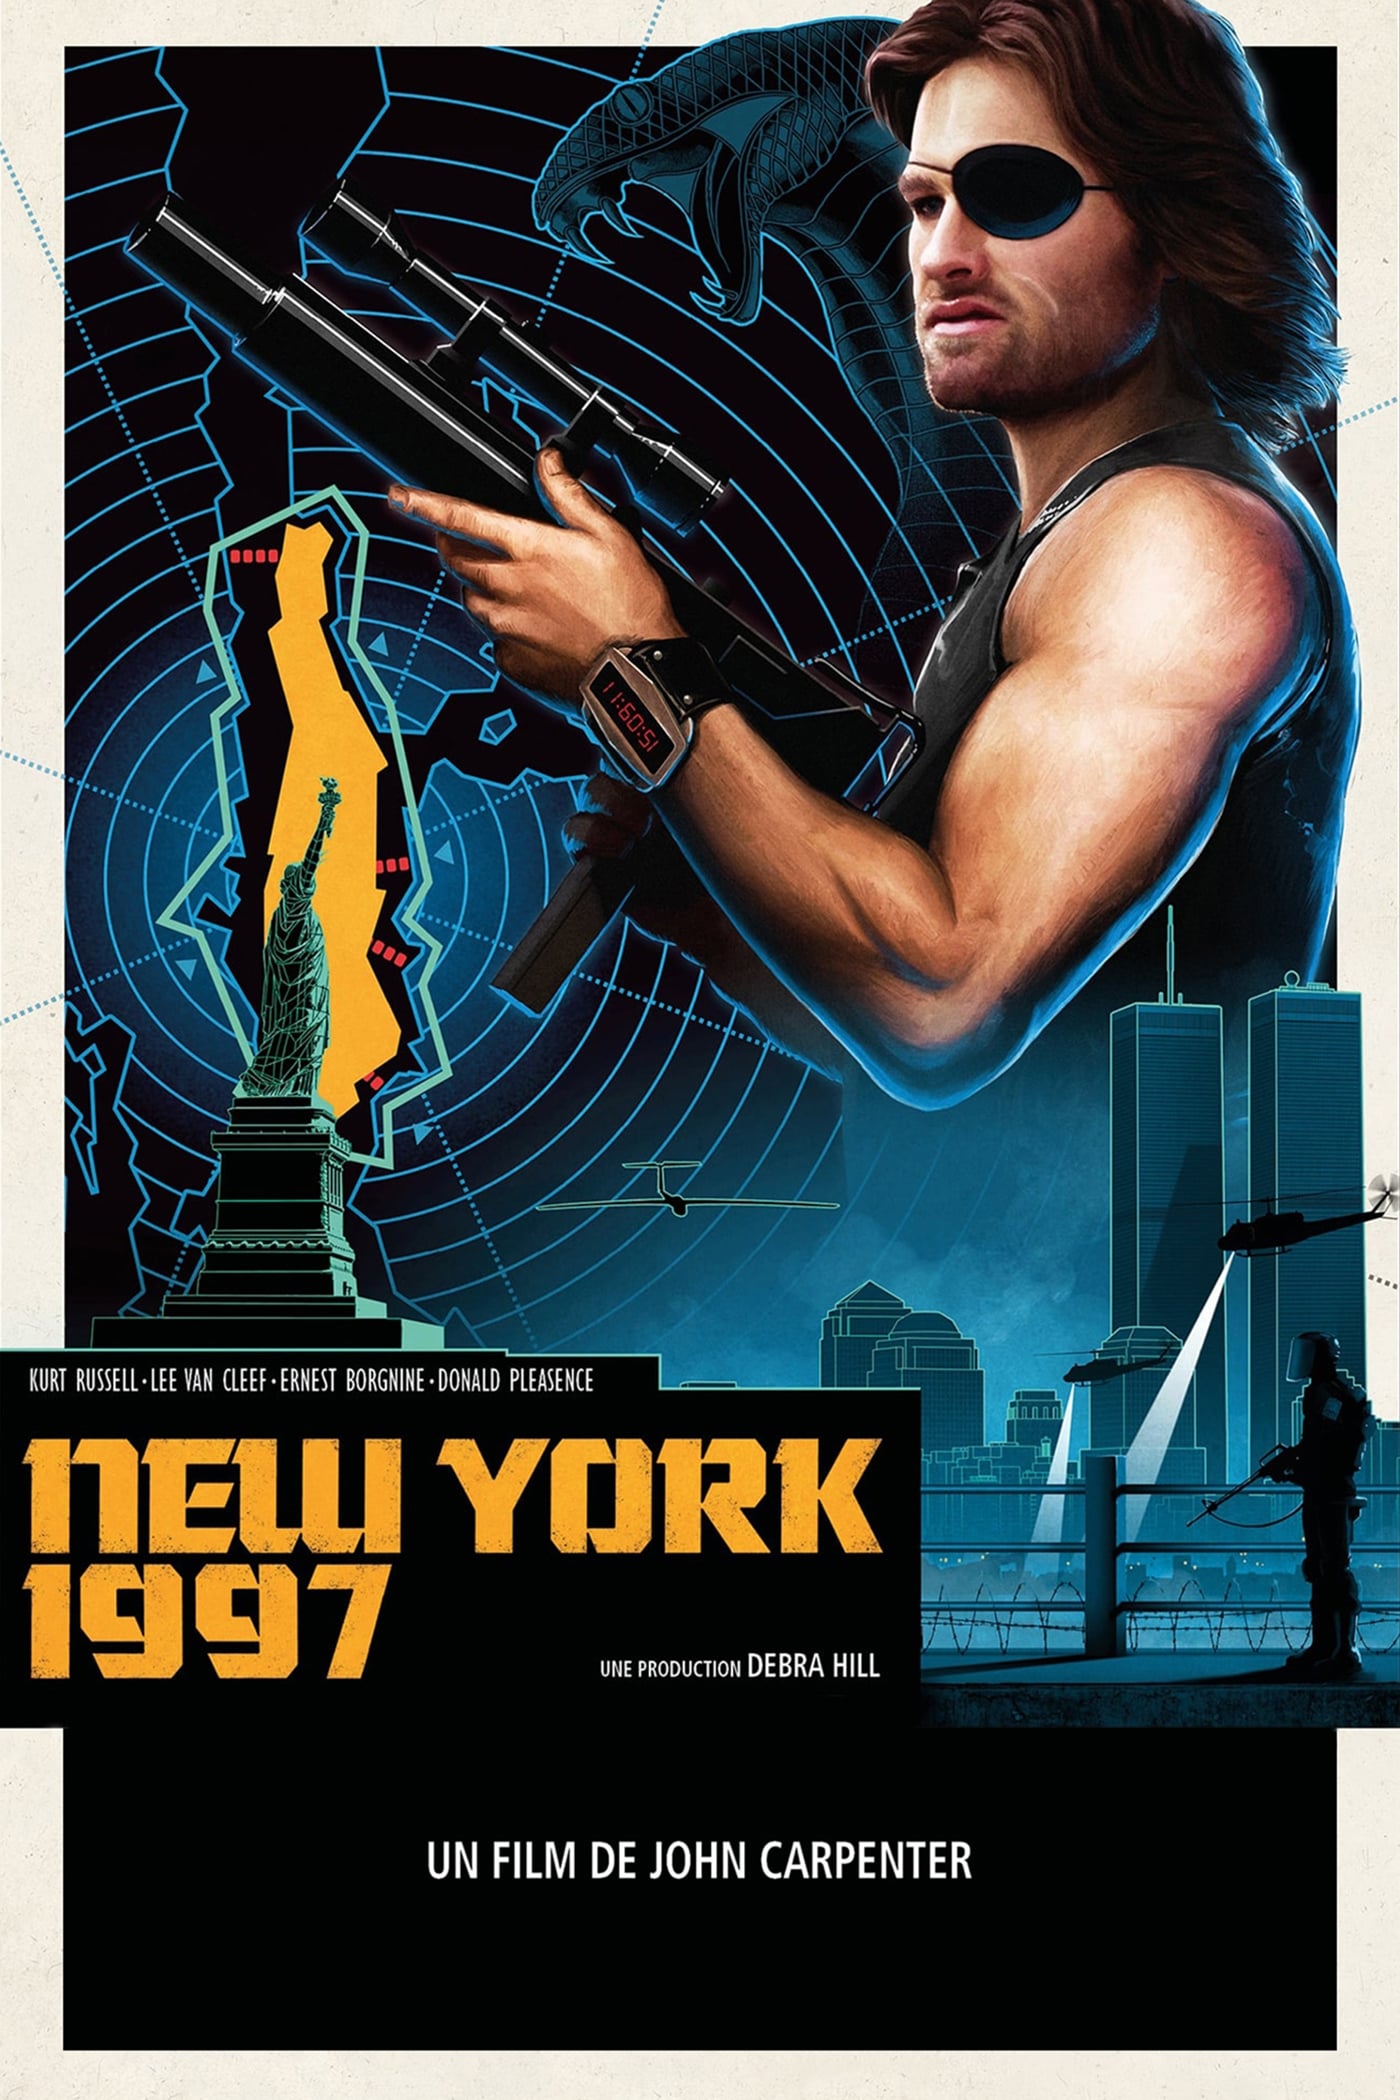 1981 Escape From New York